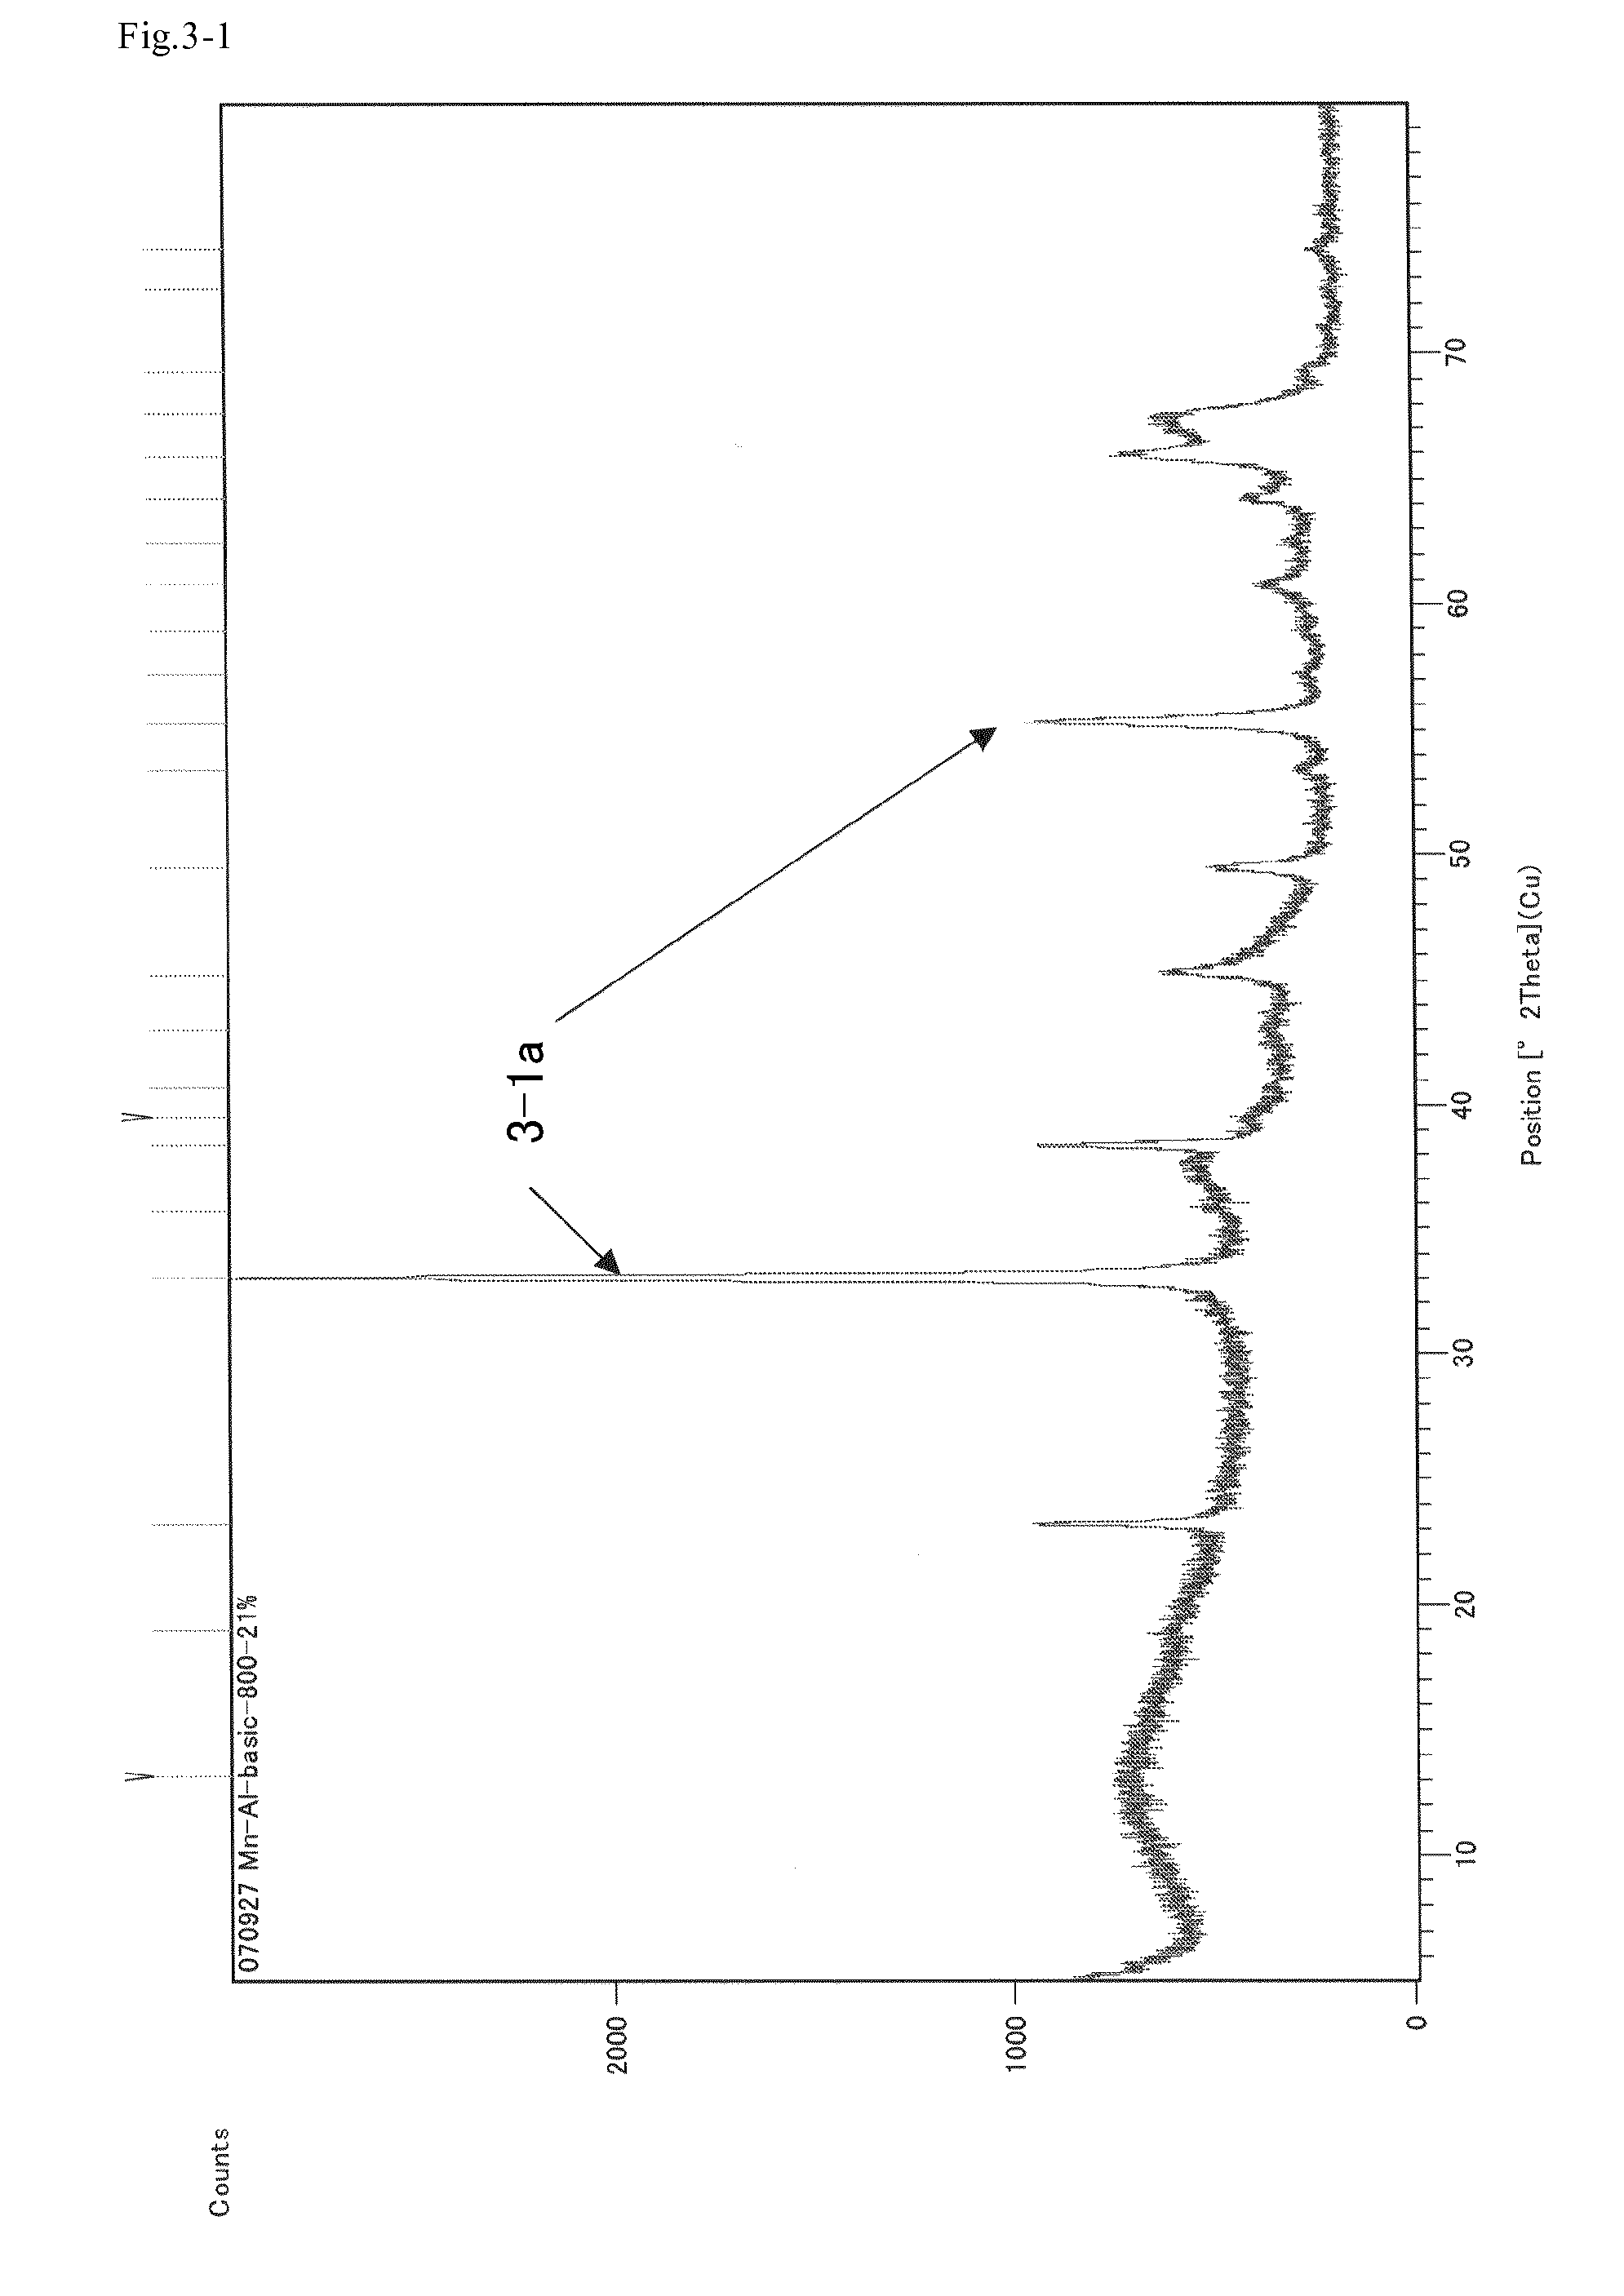 Method for producing fatty acid alkyl esters and/or glycerin using fat or oil